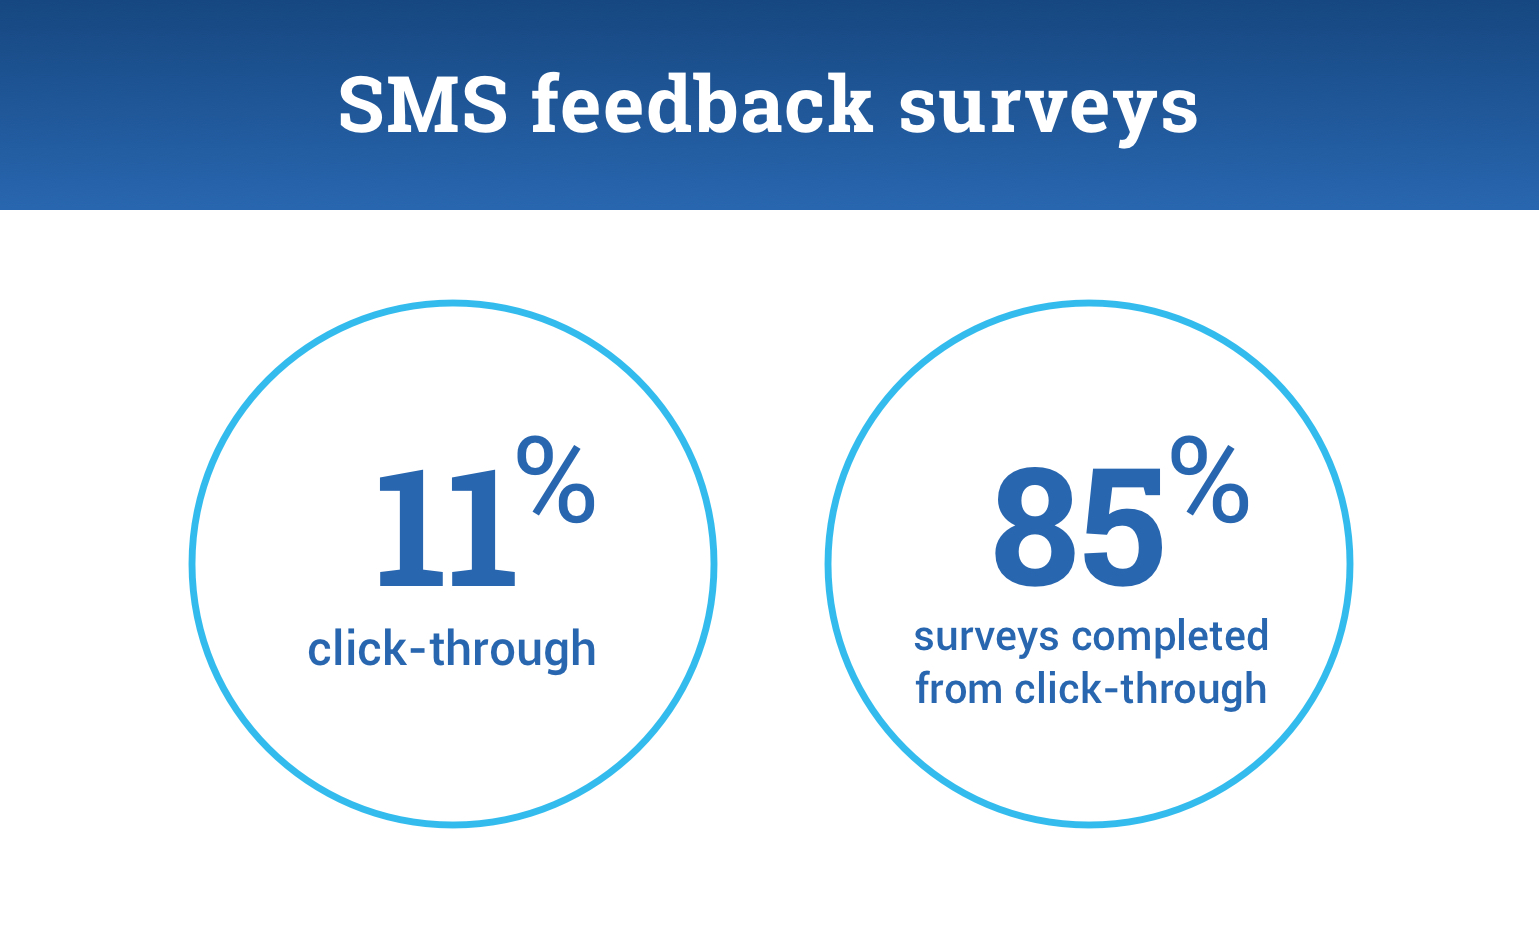 An infographic showing the results from using SMS for feedback:

11% click-through.
85% surveys completed from click-through.